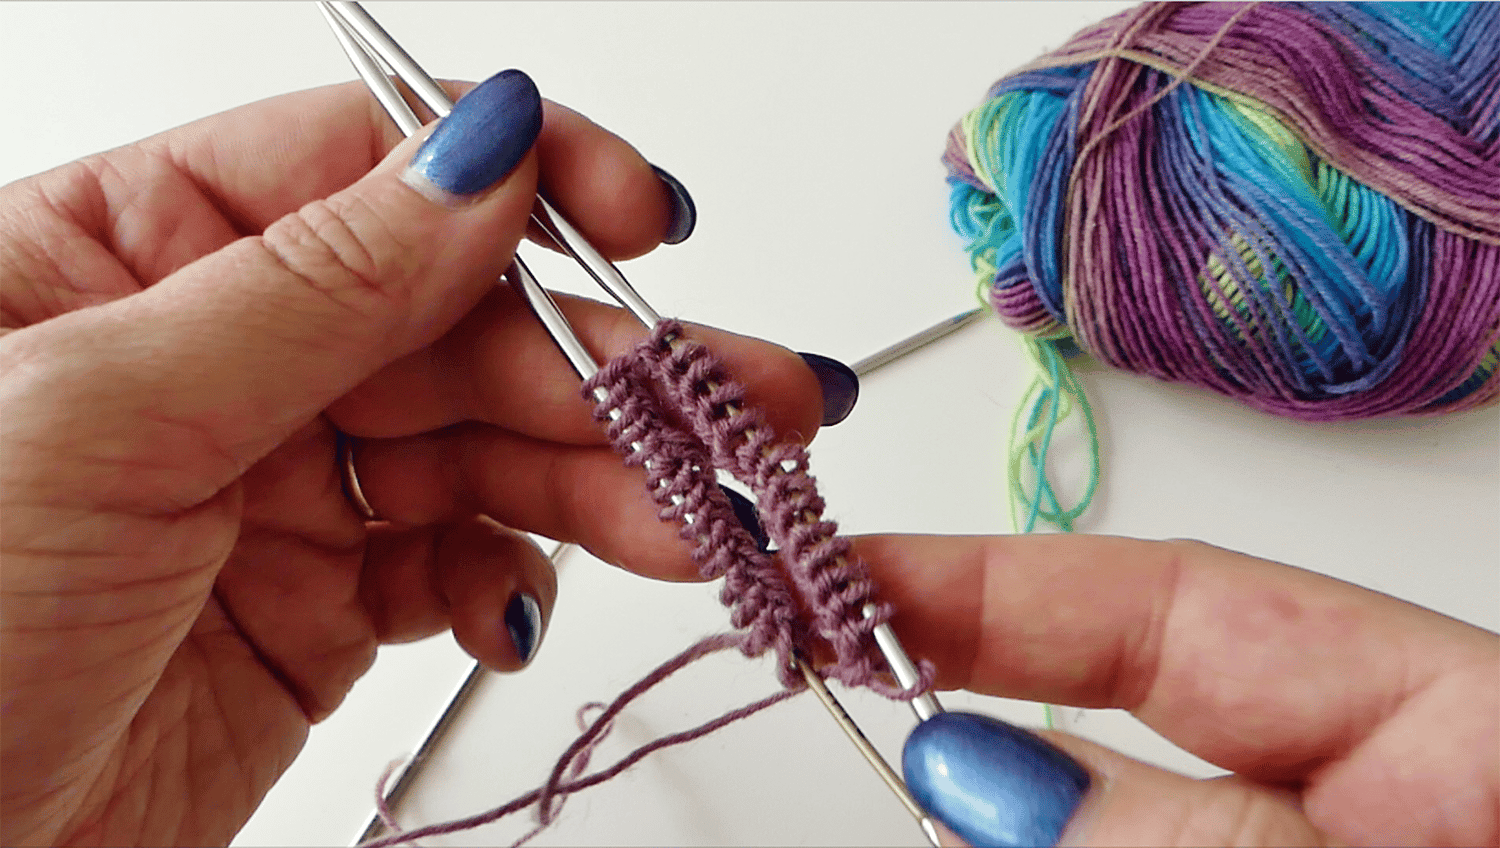 Knitting socks with the addiCraSyTrio - Step 2 Pick up stitches and close to form a round